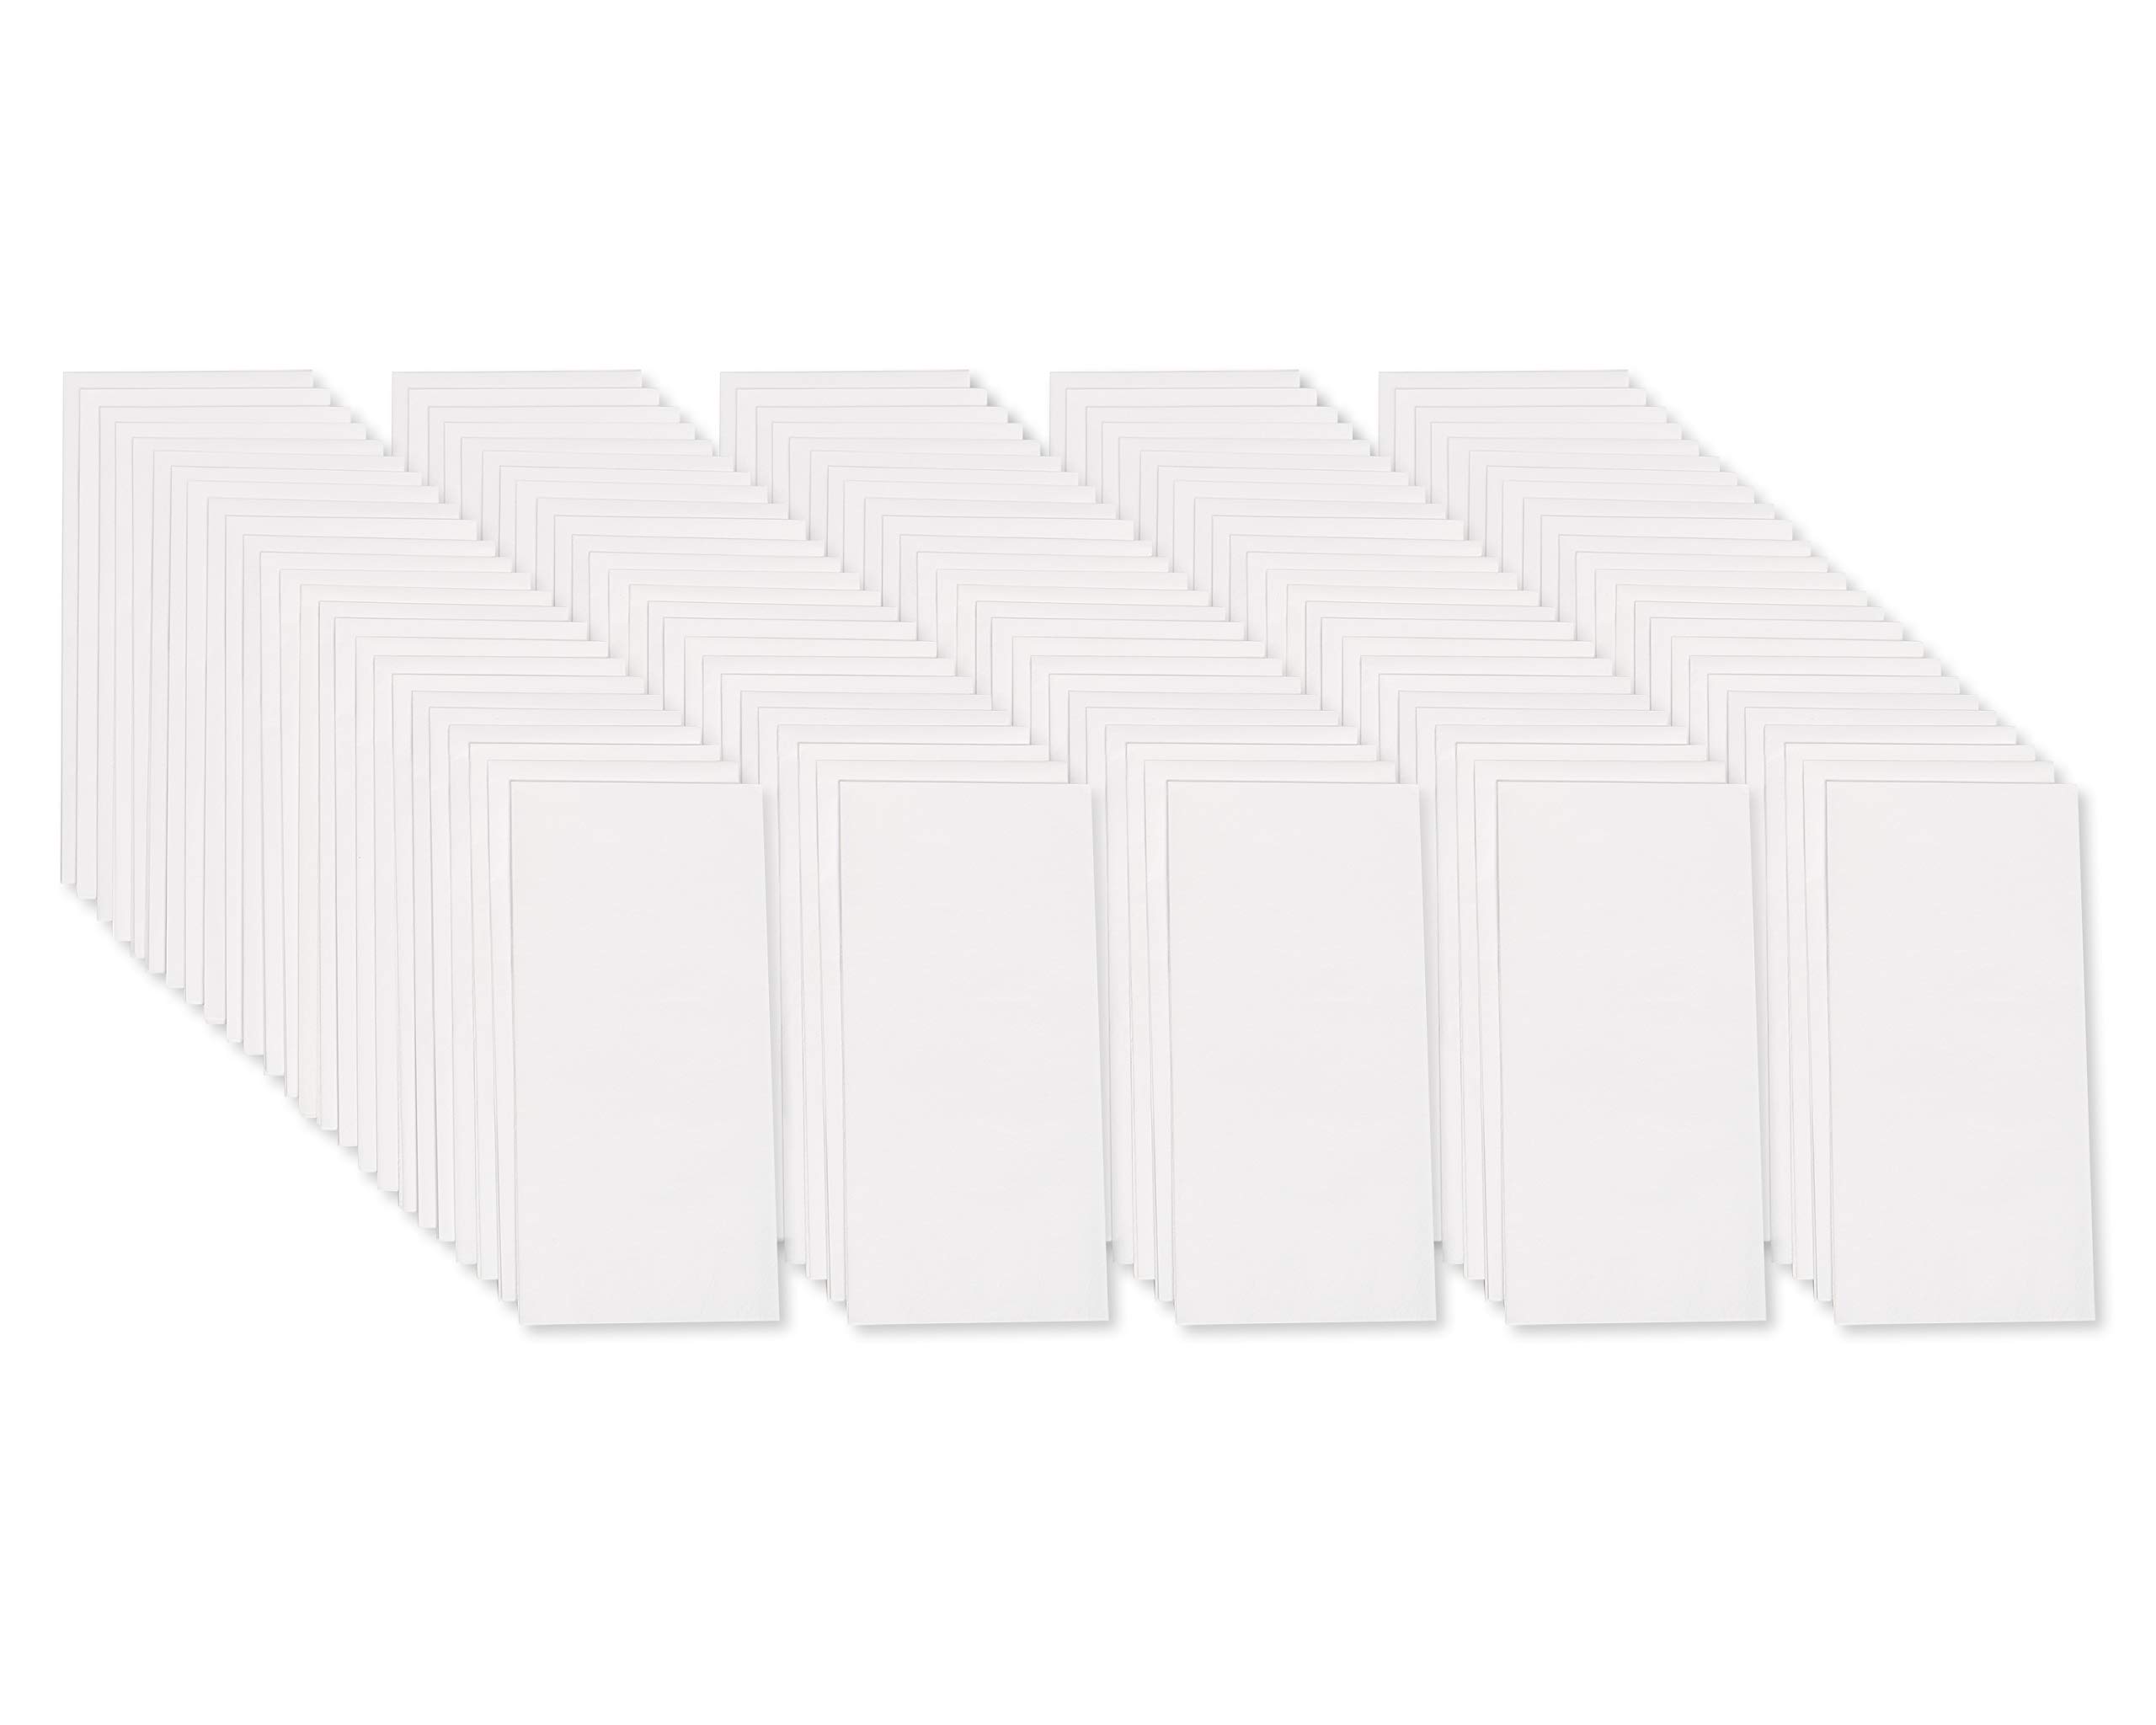 American Greetings 125 Sheet Bulk White Tissue Paper for Graduation, Birthdays and All Occasions